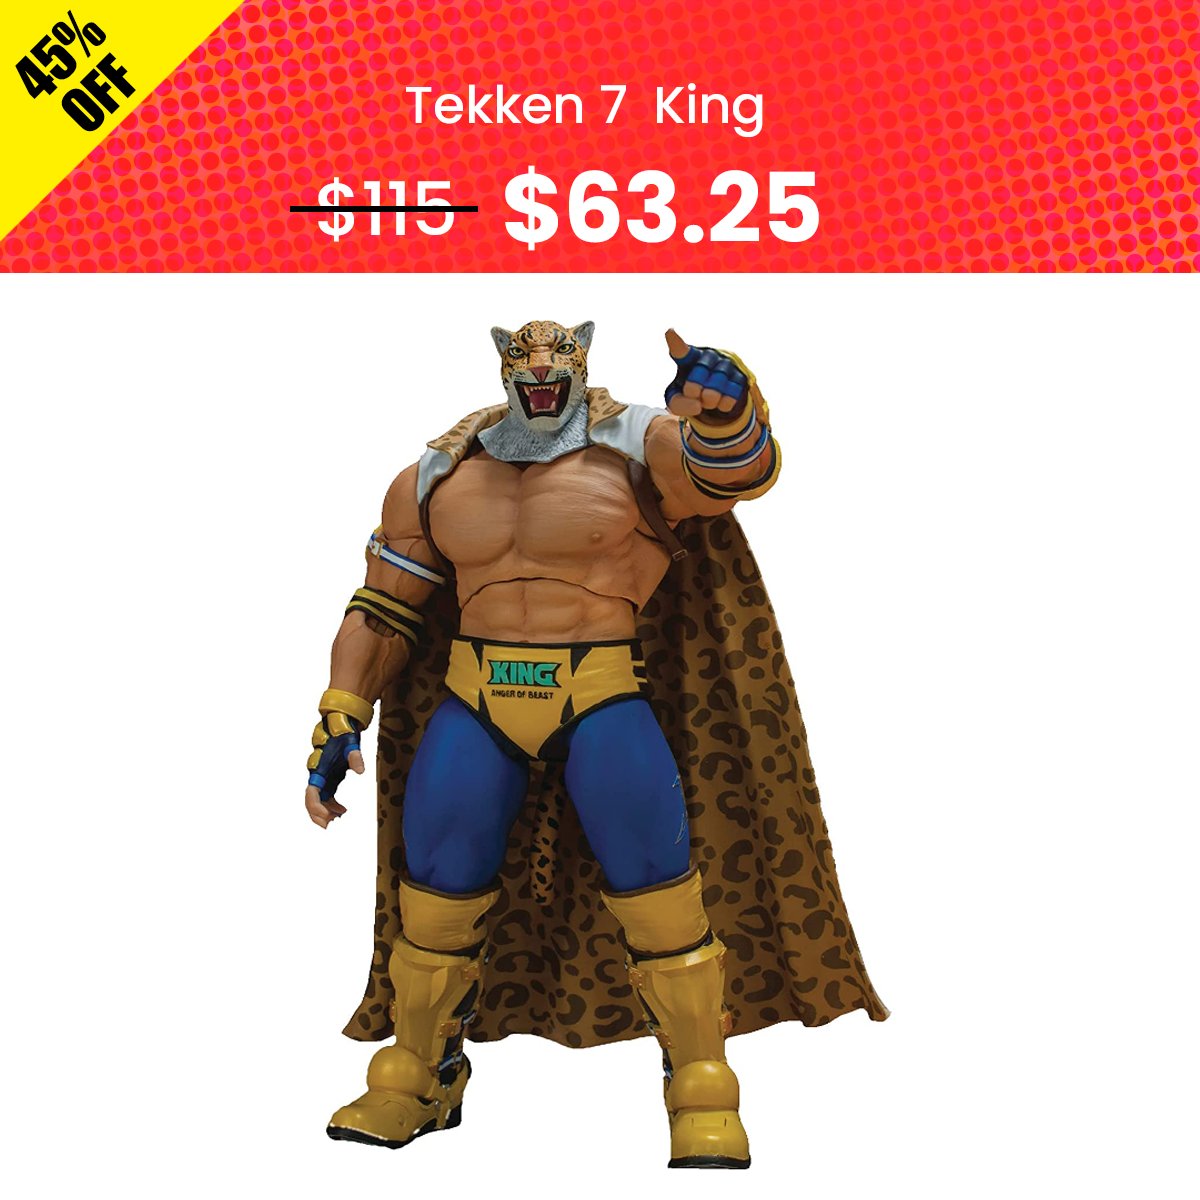 Storm Collectibles King Action Figure is 45% off right now during our special Black Friday Sales Event! Don't miss this chance to add the King to your collection at this special price. 👑bit.ly/3ViVZa0 #Tekken #BlackFridaySale